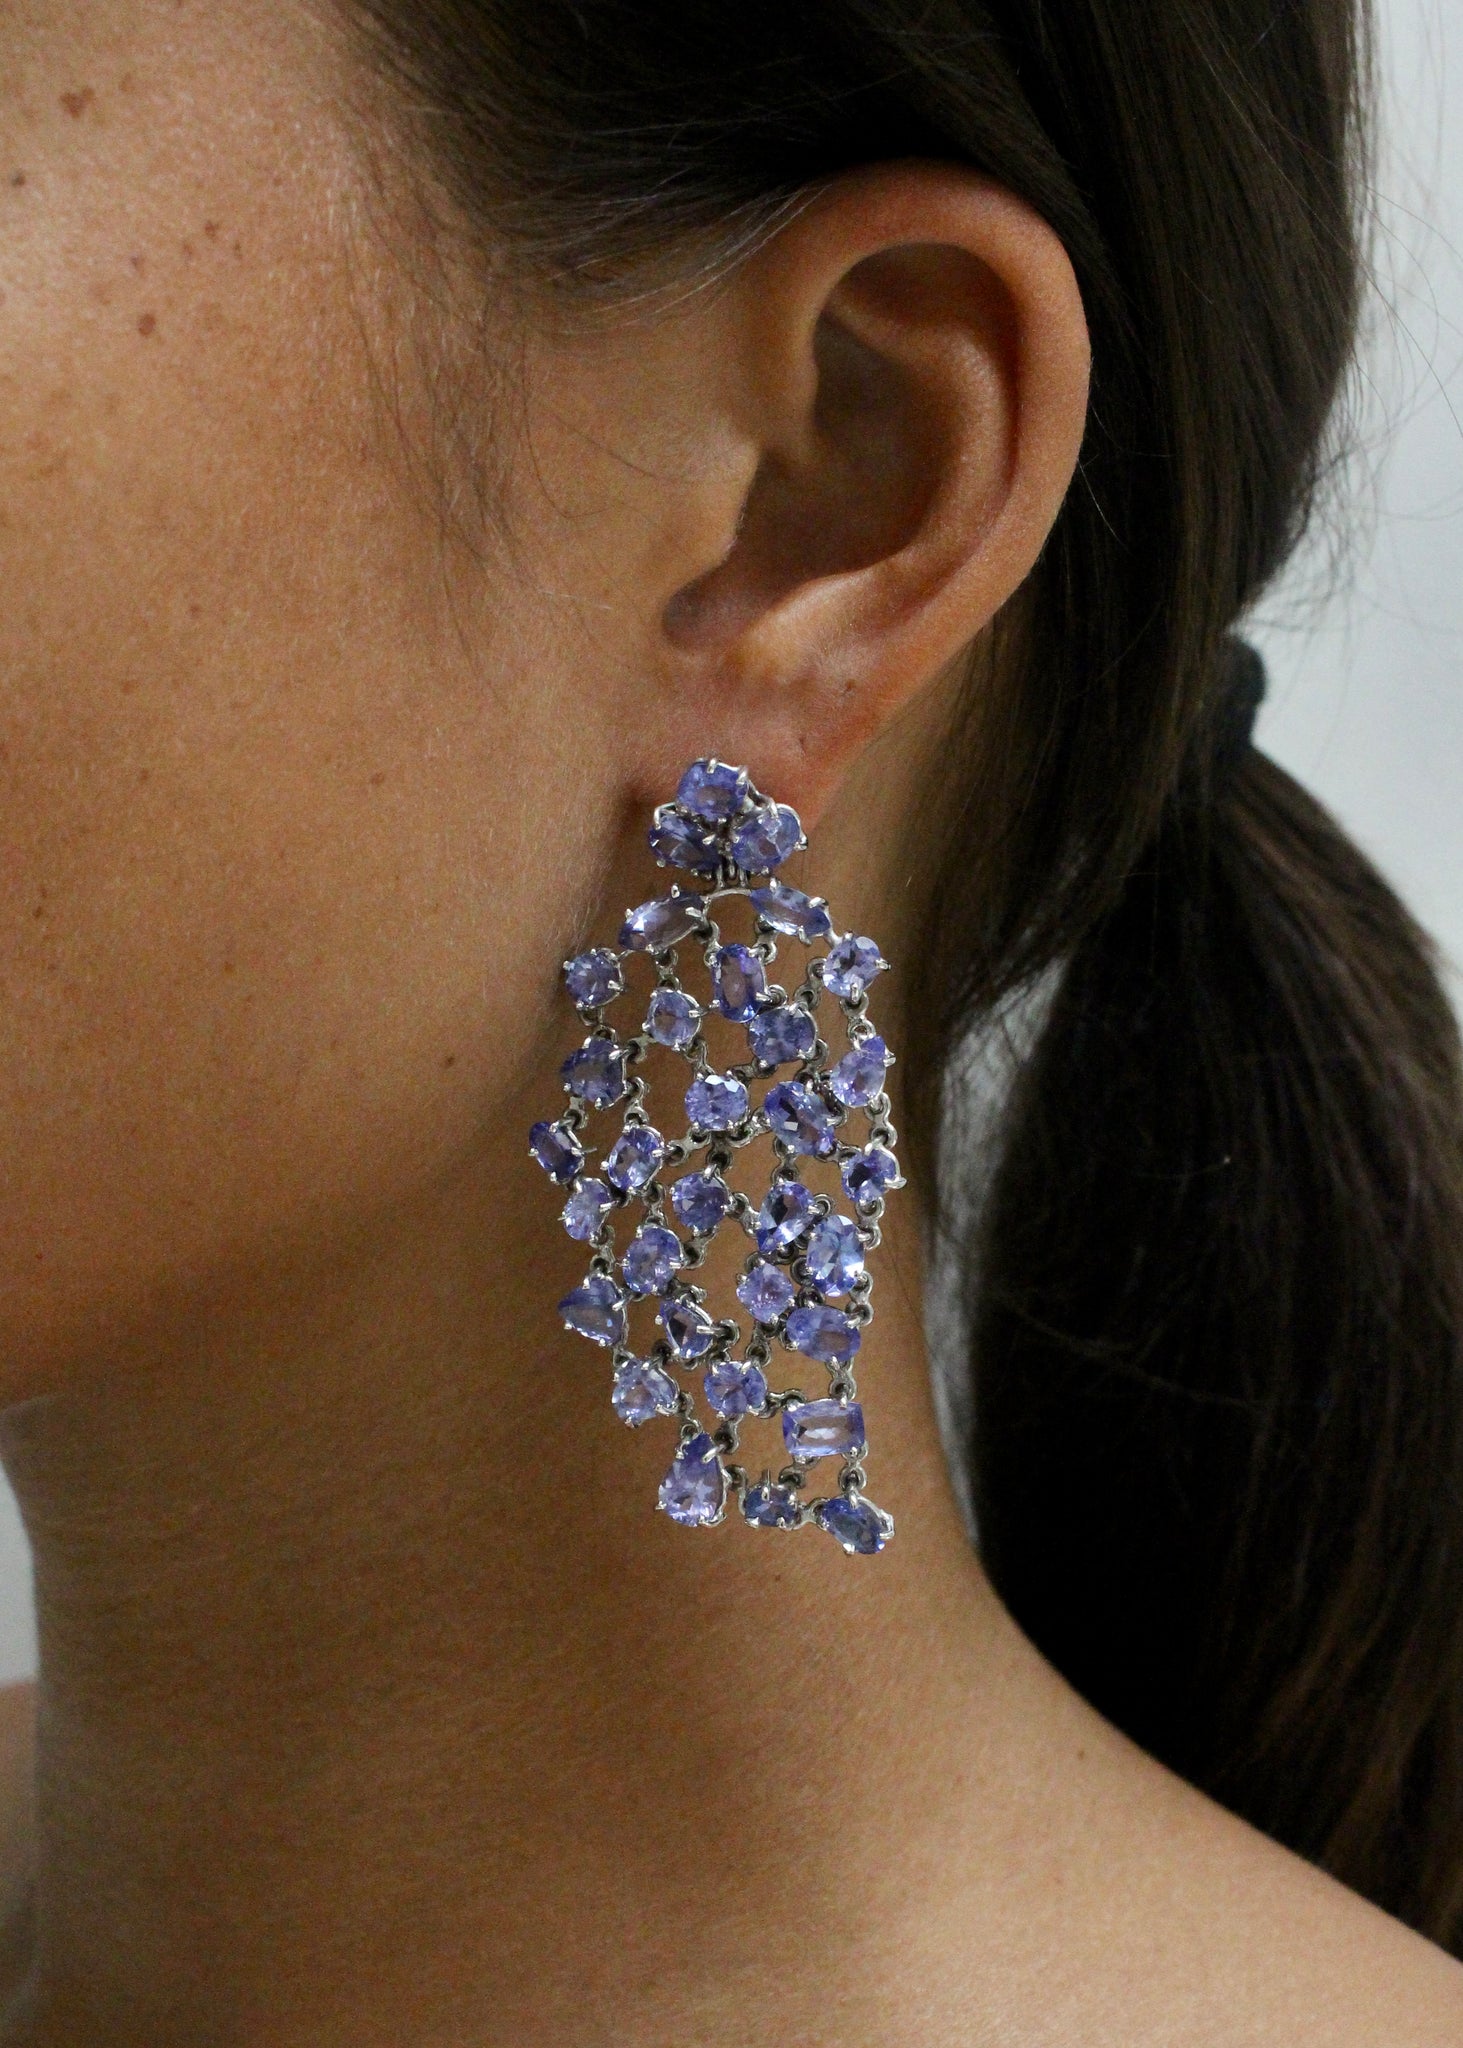 18 krt white gold earrings set with 68 oval Tanzanites